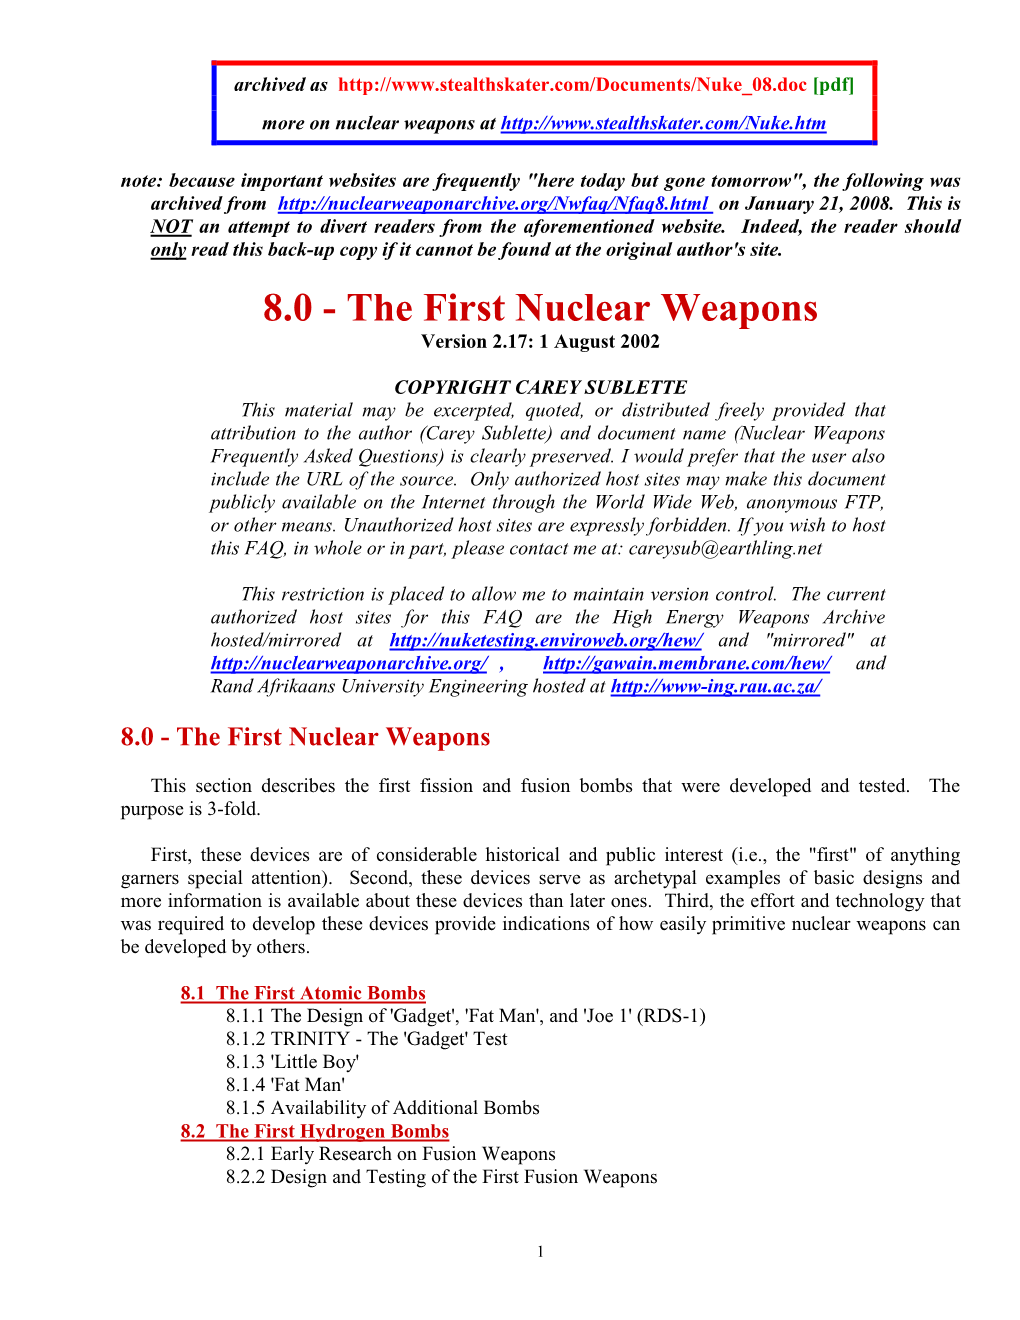 8.0 - the First Nuclear Weapons Version 2.17: 1 August 2002